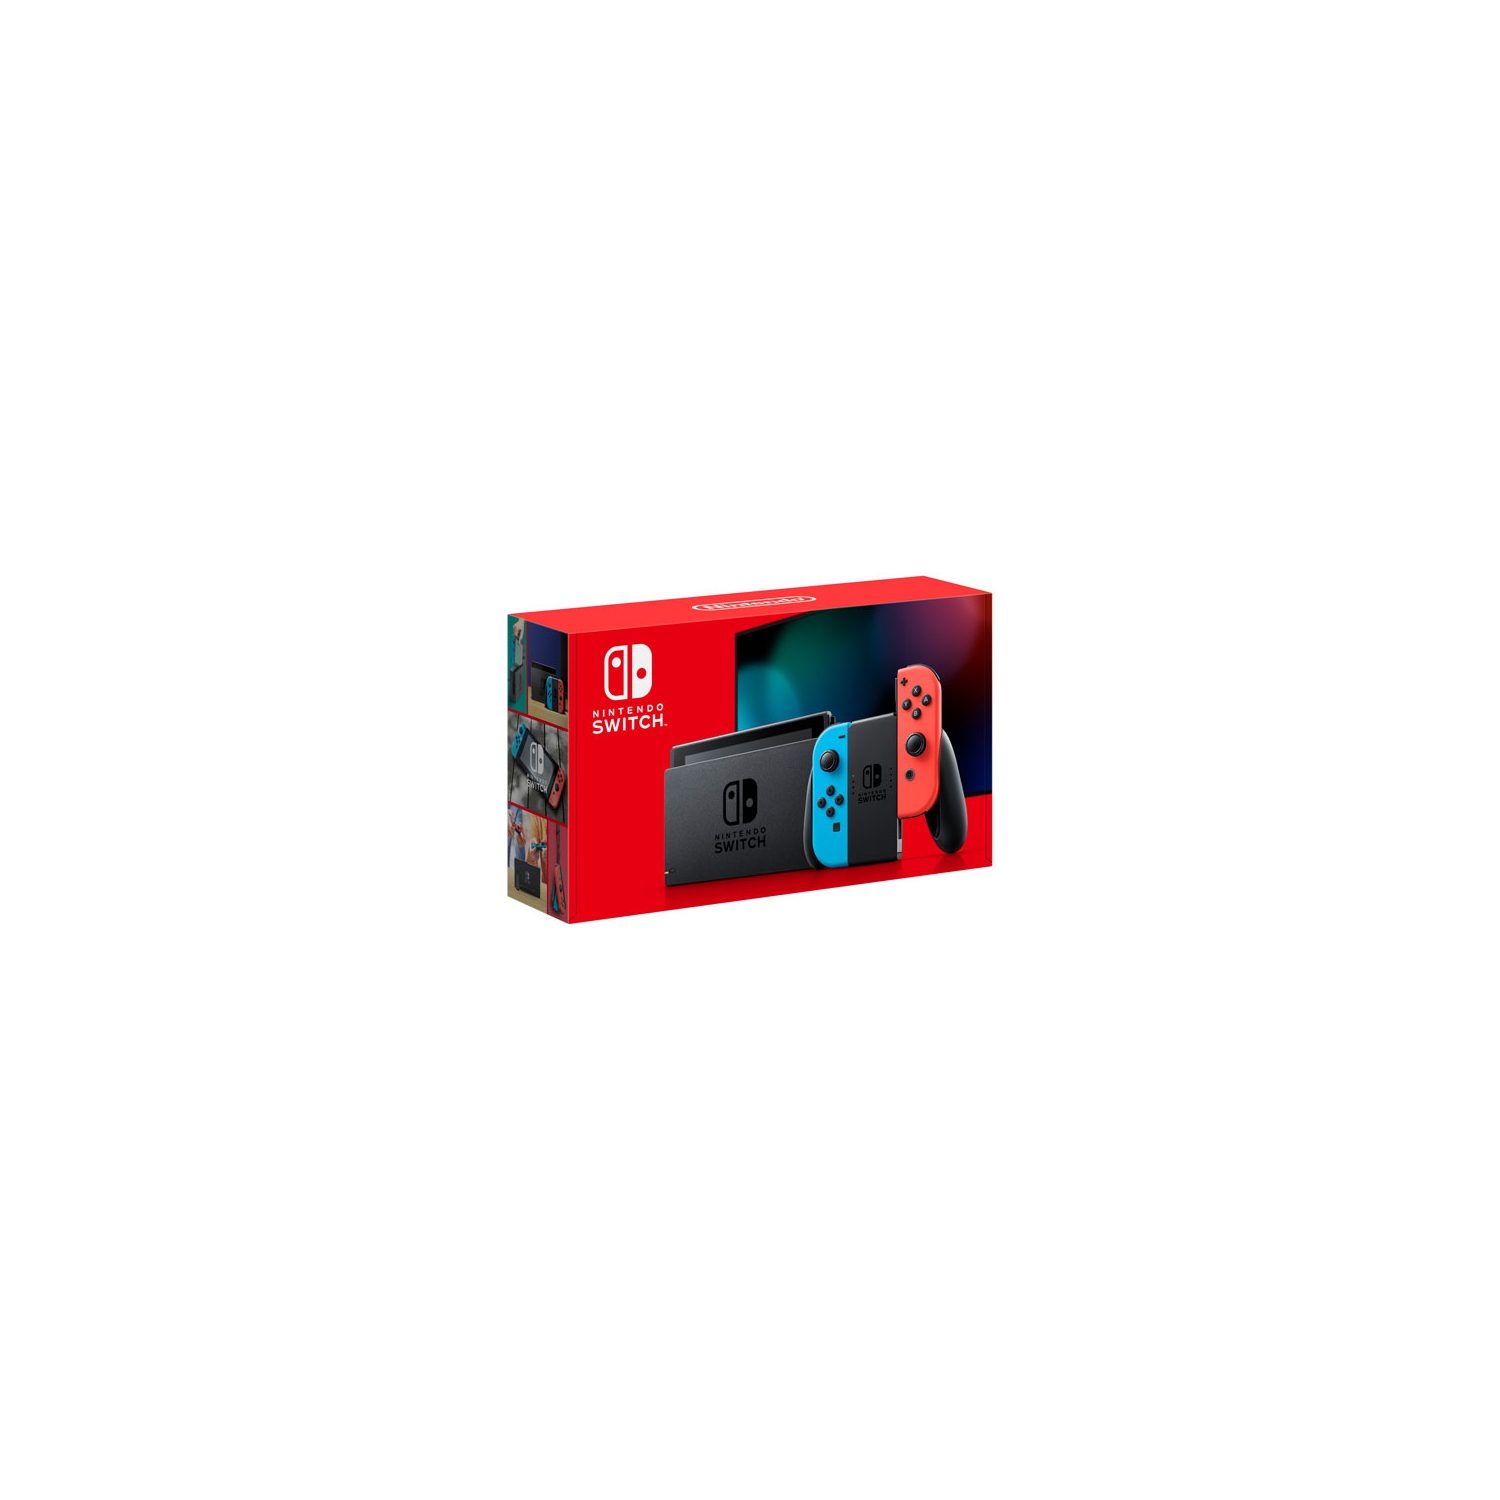 Refurbished (Fair) - Nintendo Switch Console with Neon Red/Blue Joy-Con